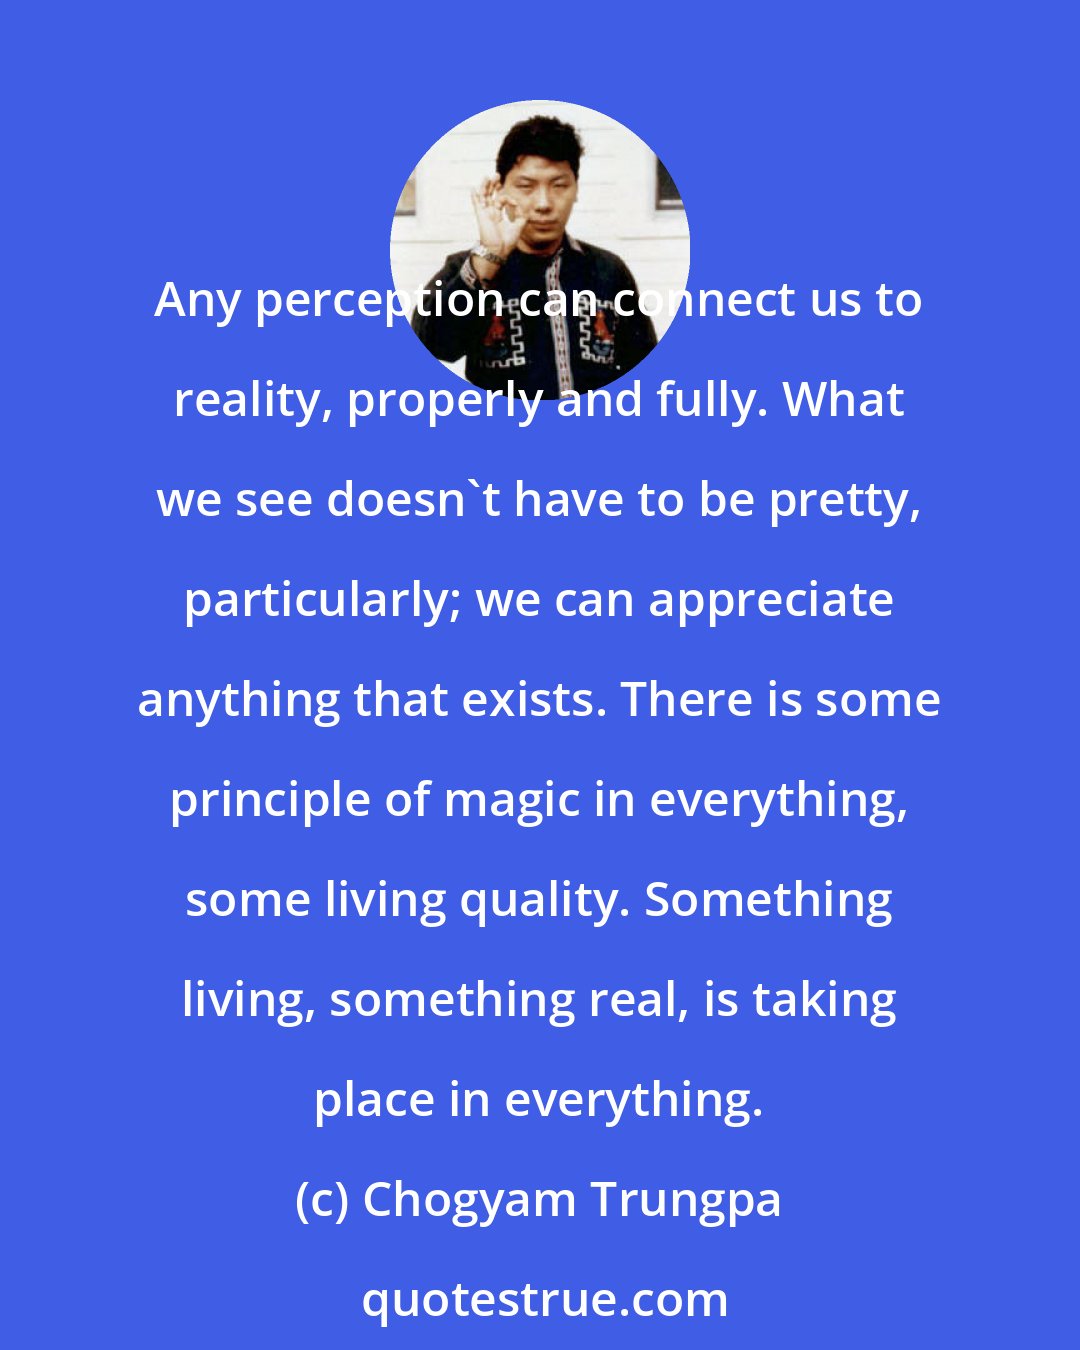 Chogyam Trungpa: Any perception can connect us to reality, properly and fully. What we see doesn't have to be pretty, particularly; we can appreciate anything that exists. There is some principle of magic in everything, some living quality. Something living, something real, is taking place in everything.